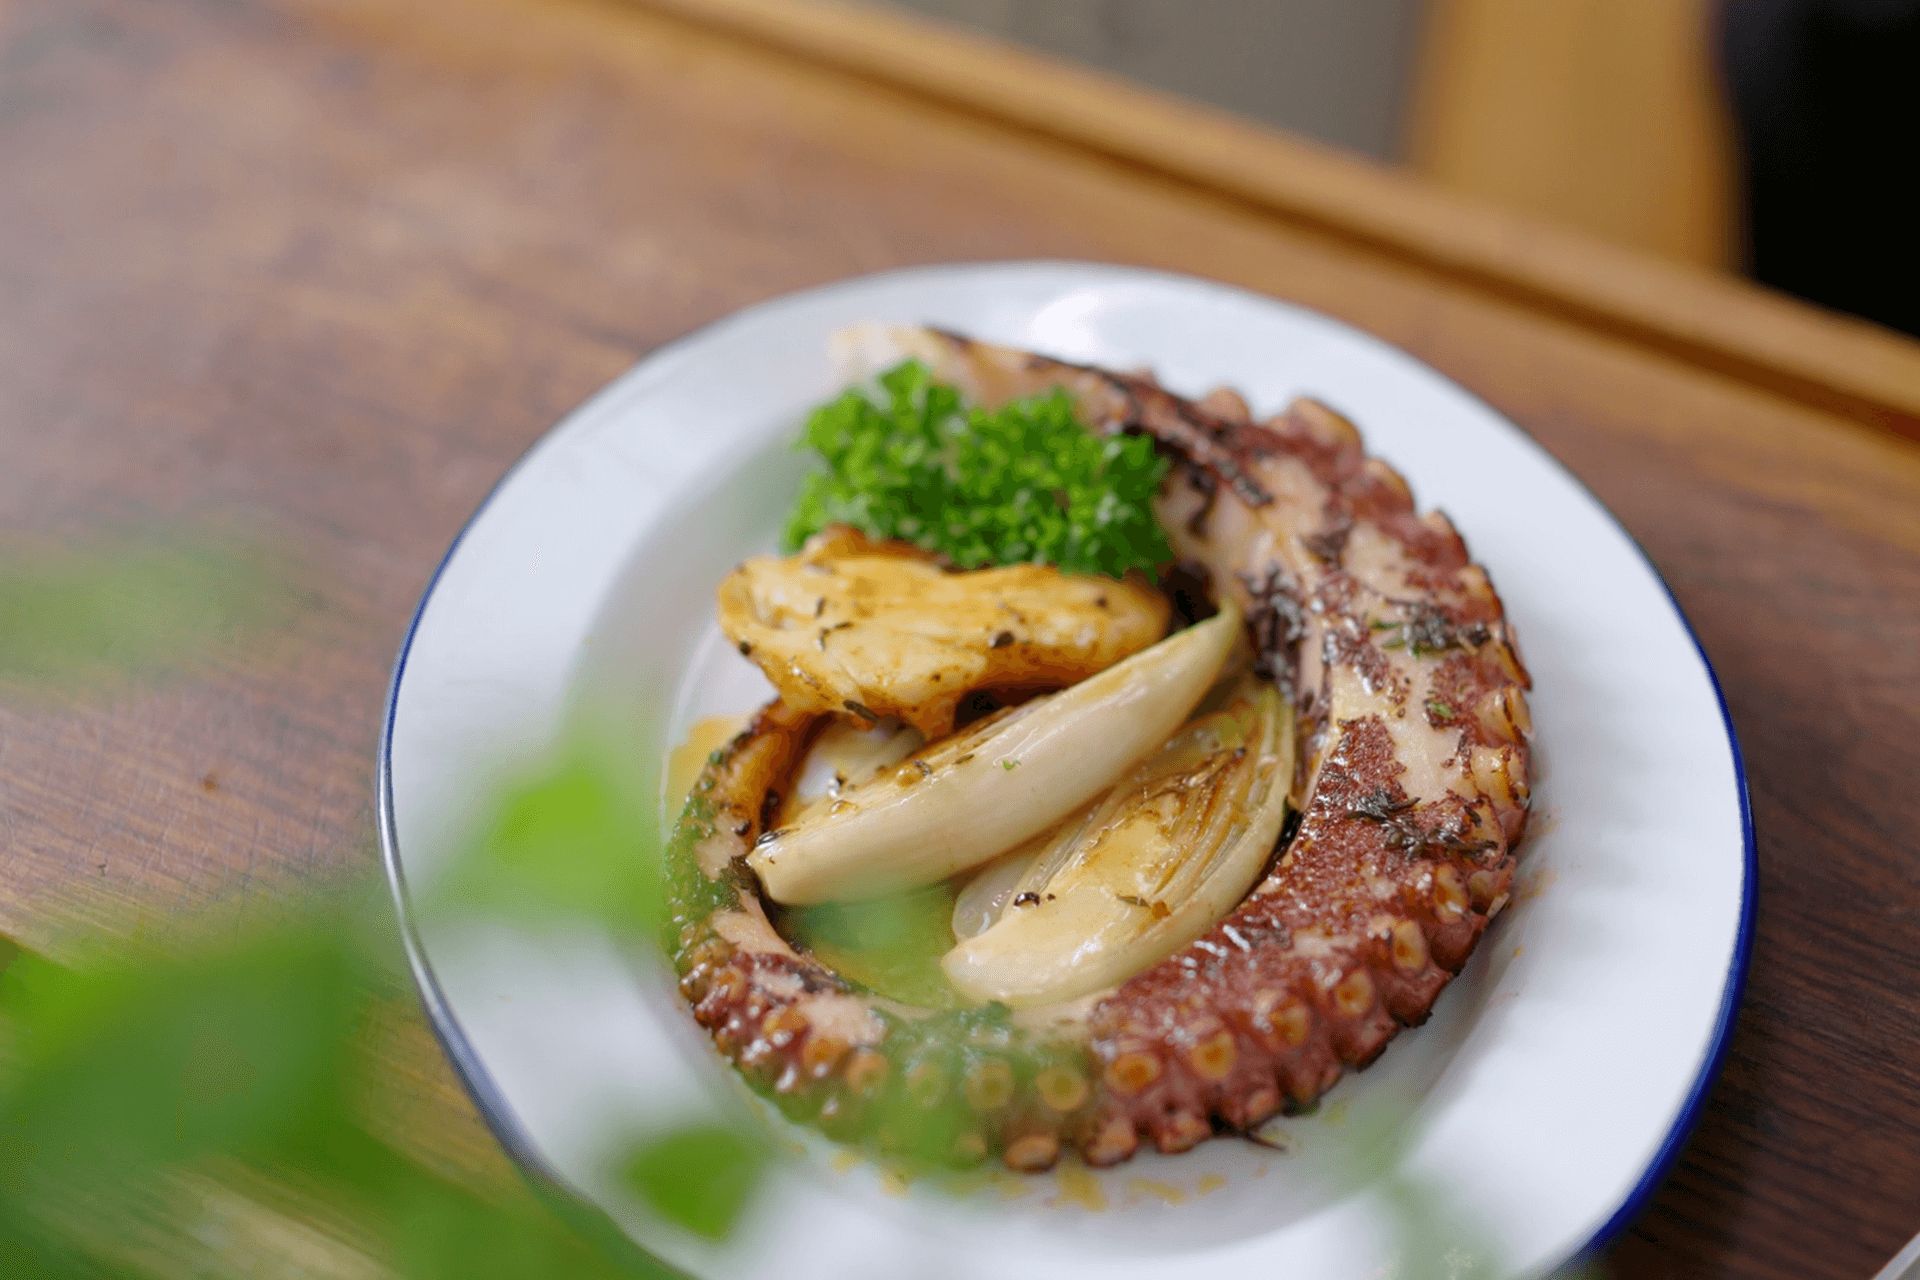 Octopus with endive and aromatic herbs